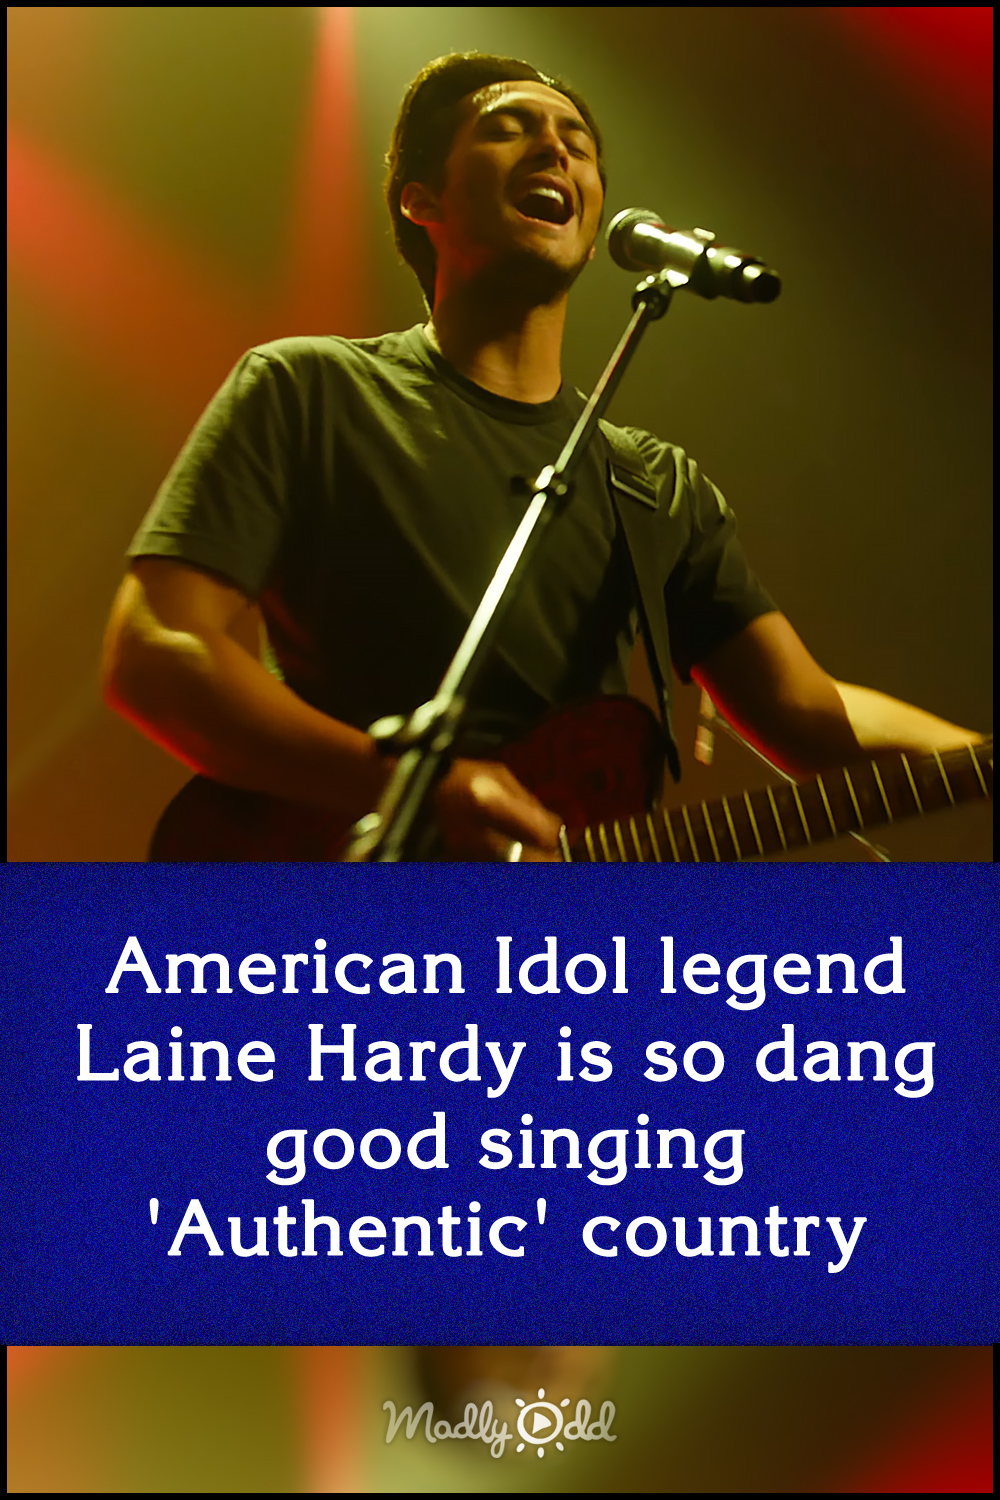 American Idol legend Laine Hardy is so dang good singing \'Authentic\' country